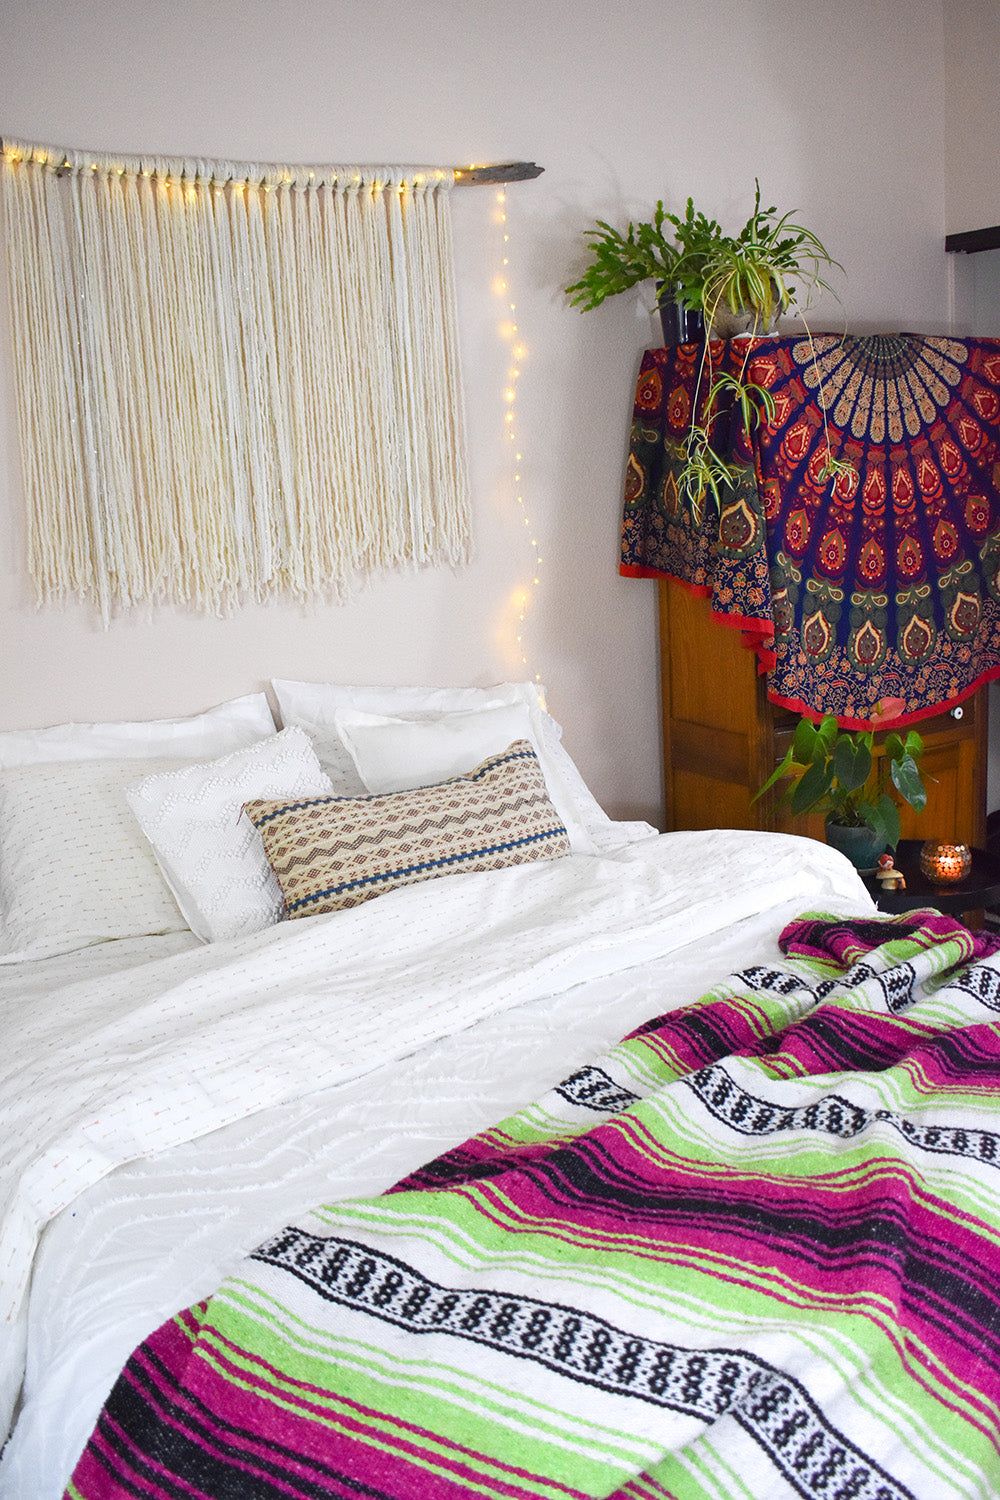 Get cozy in the bedroom with the Neon Candy Bohemian Fiesta Blanket for a Boho Hygge look.